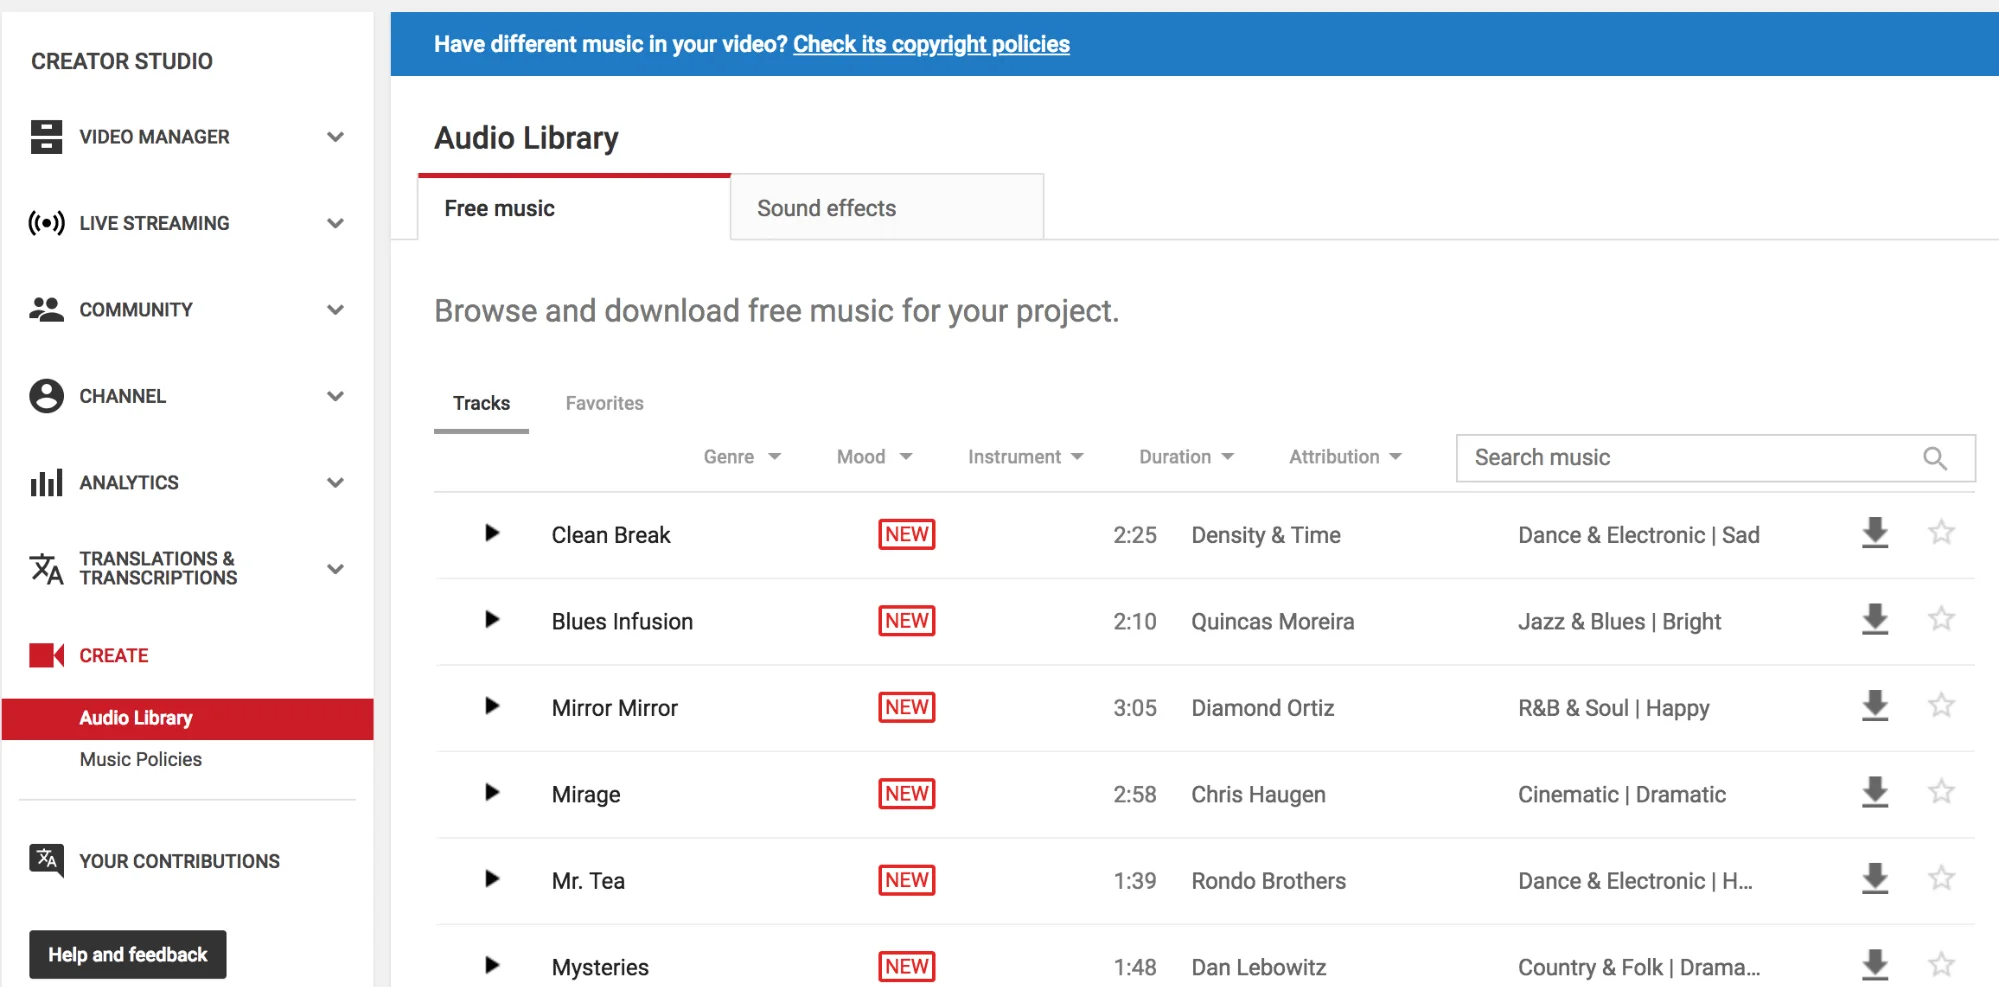 Audio Library: Royalty-Free Music For Creators